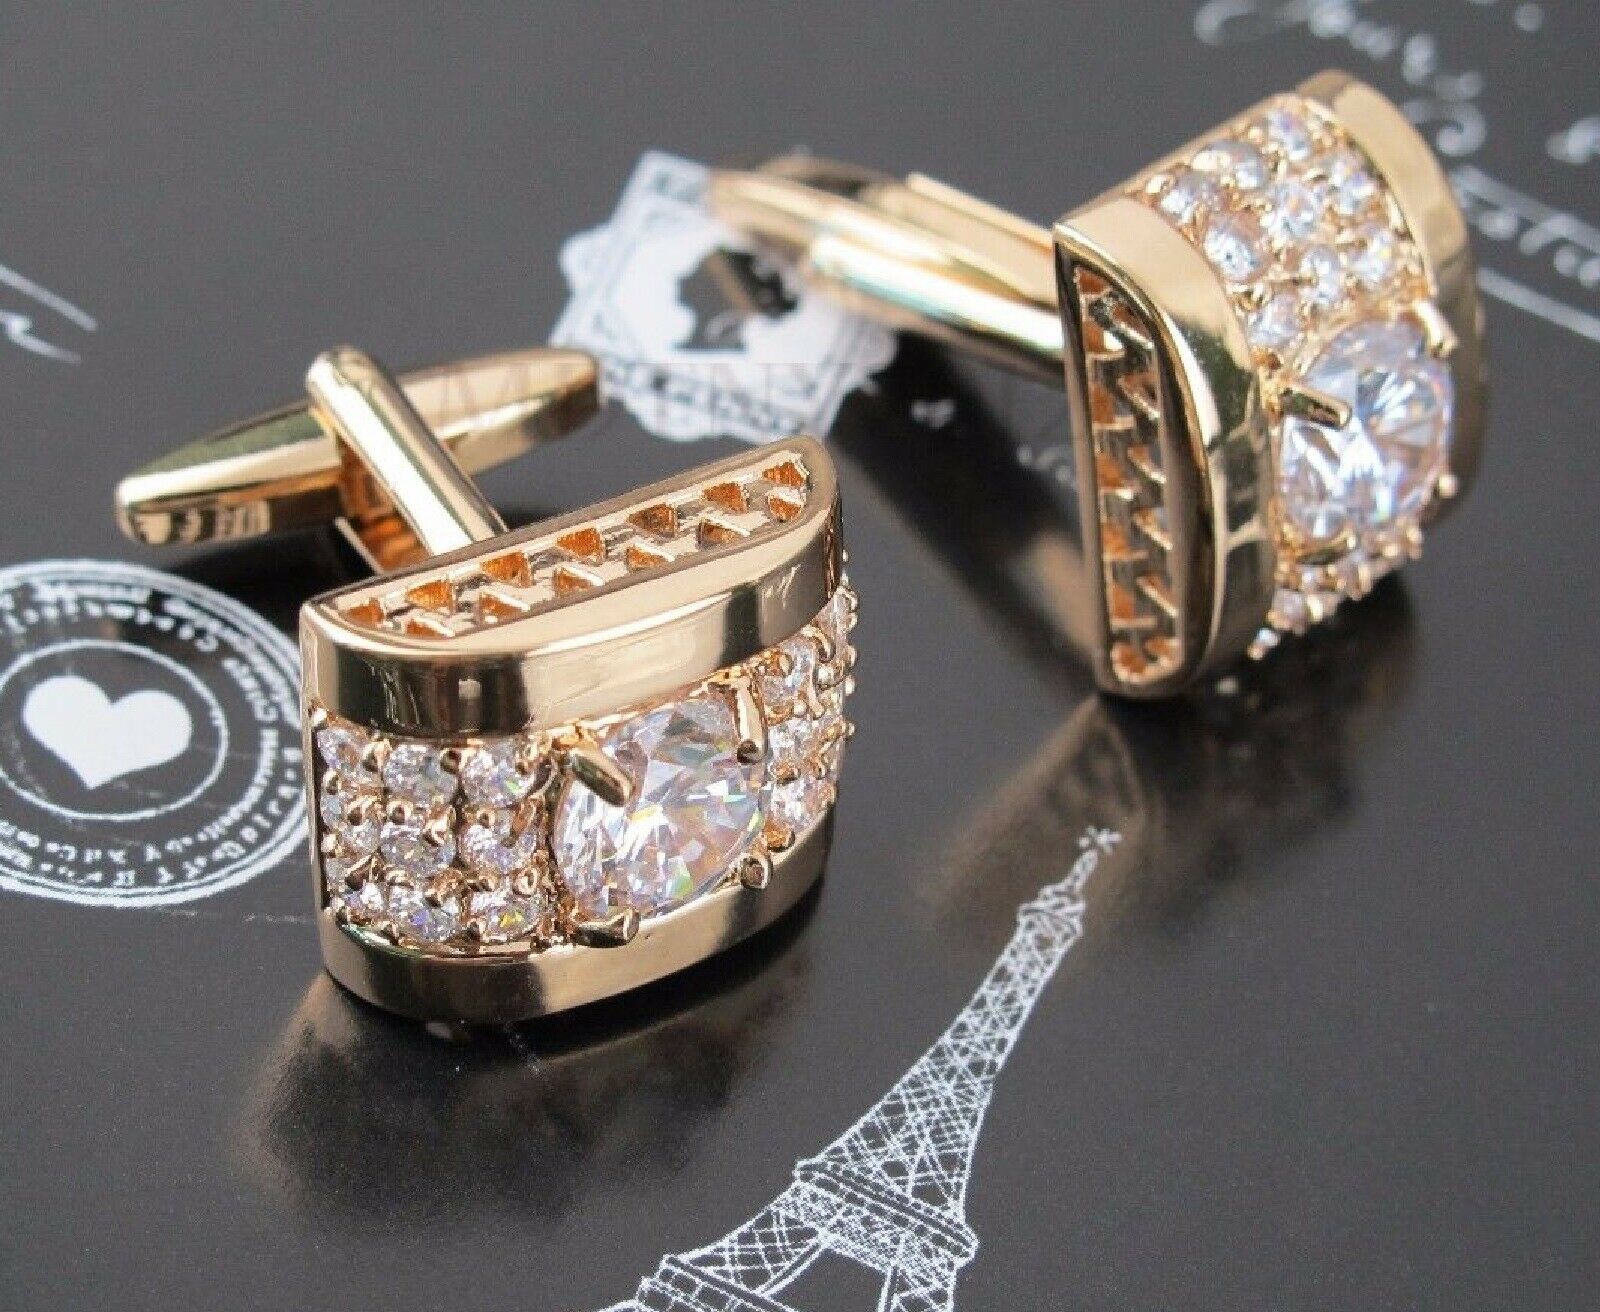 New Gold White Crystal Silver Mens Cufflinks Shirt Cuff Links Wedding Party Gift